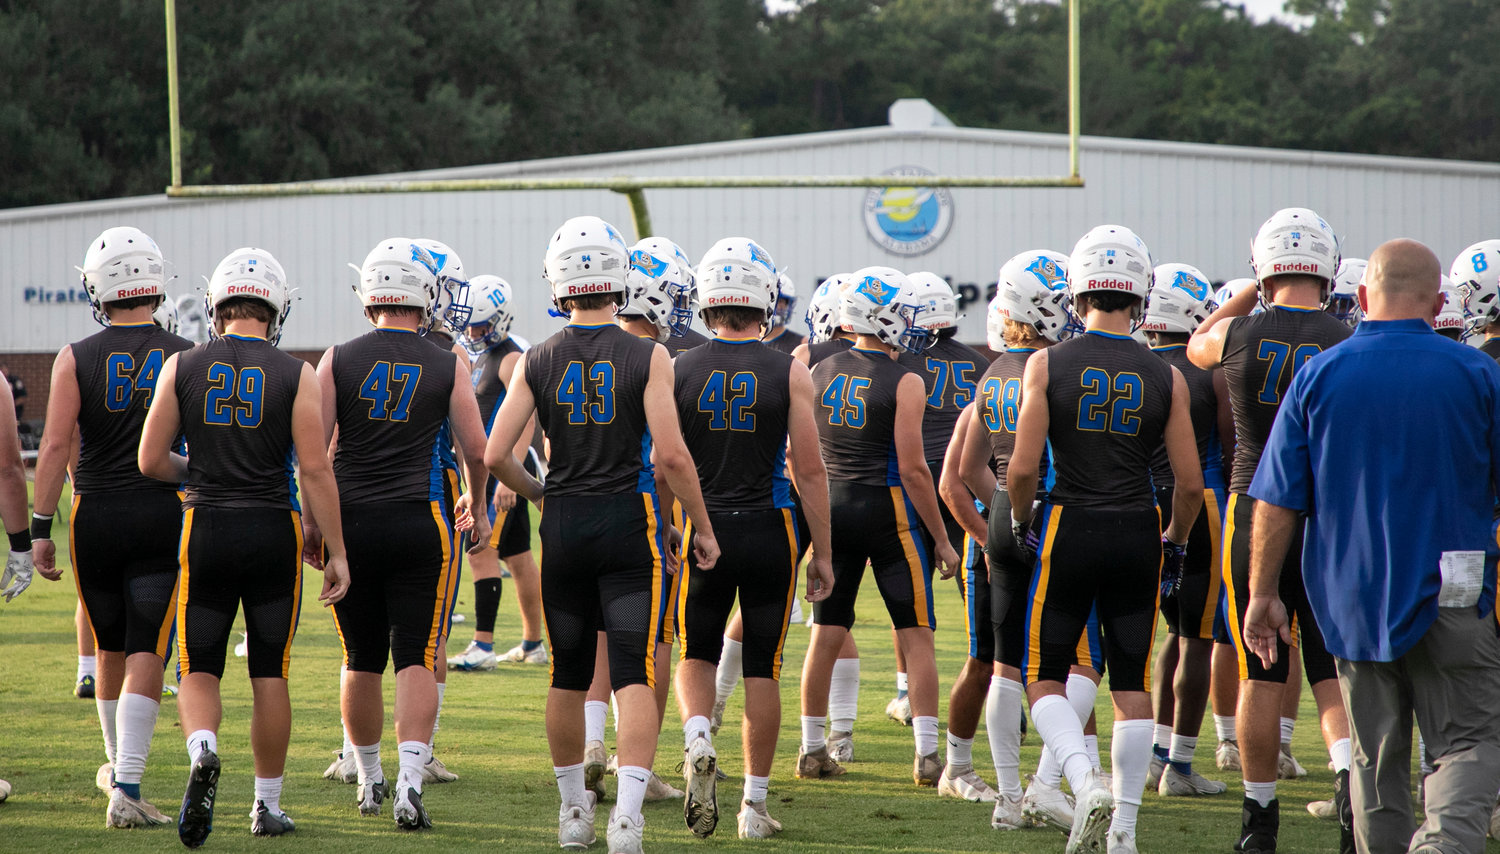 The Fairhope Pirates head back to the locker room before their season-opening contest against the Spanish Fort Toros Aug. 19 at Fairhope Municipal Stadium. The fieldhouse outside of W. C. Majors Field will soon be named after longtime Pirate head football coach Joe Dean.